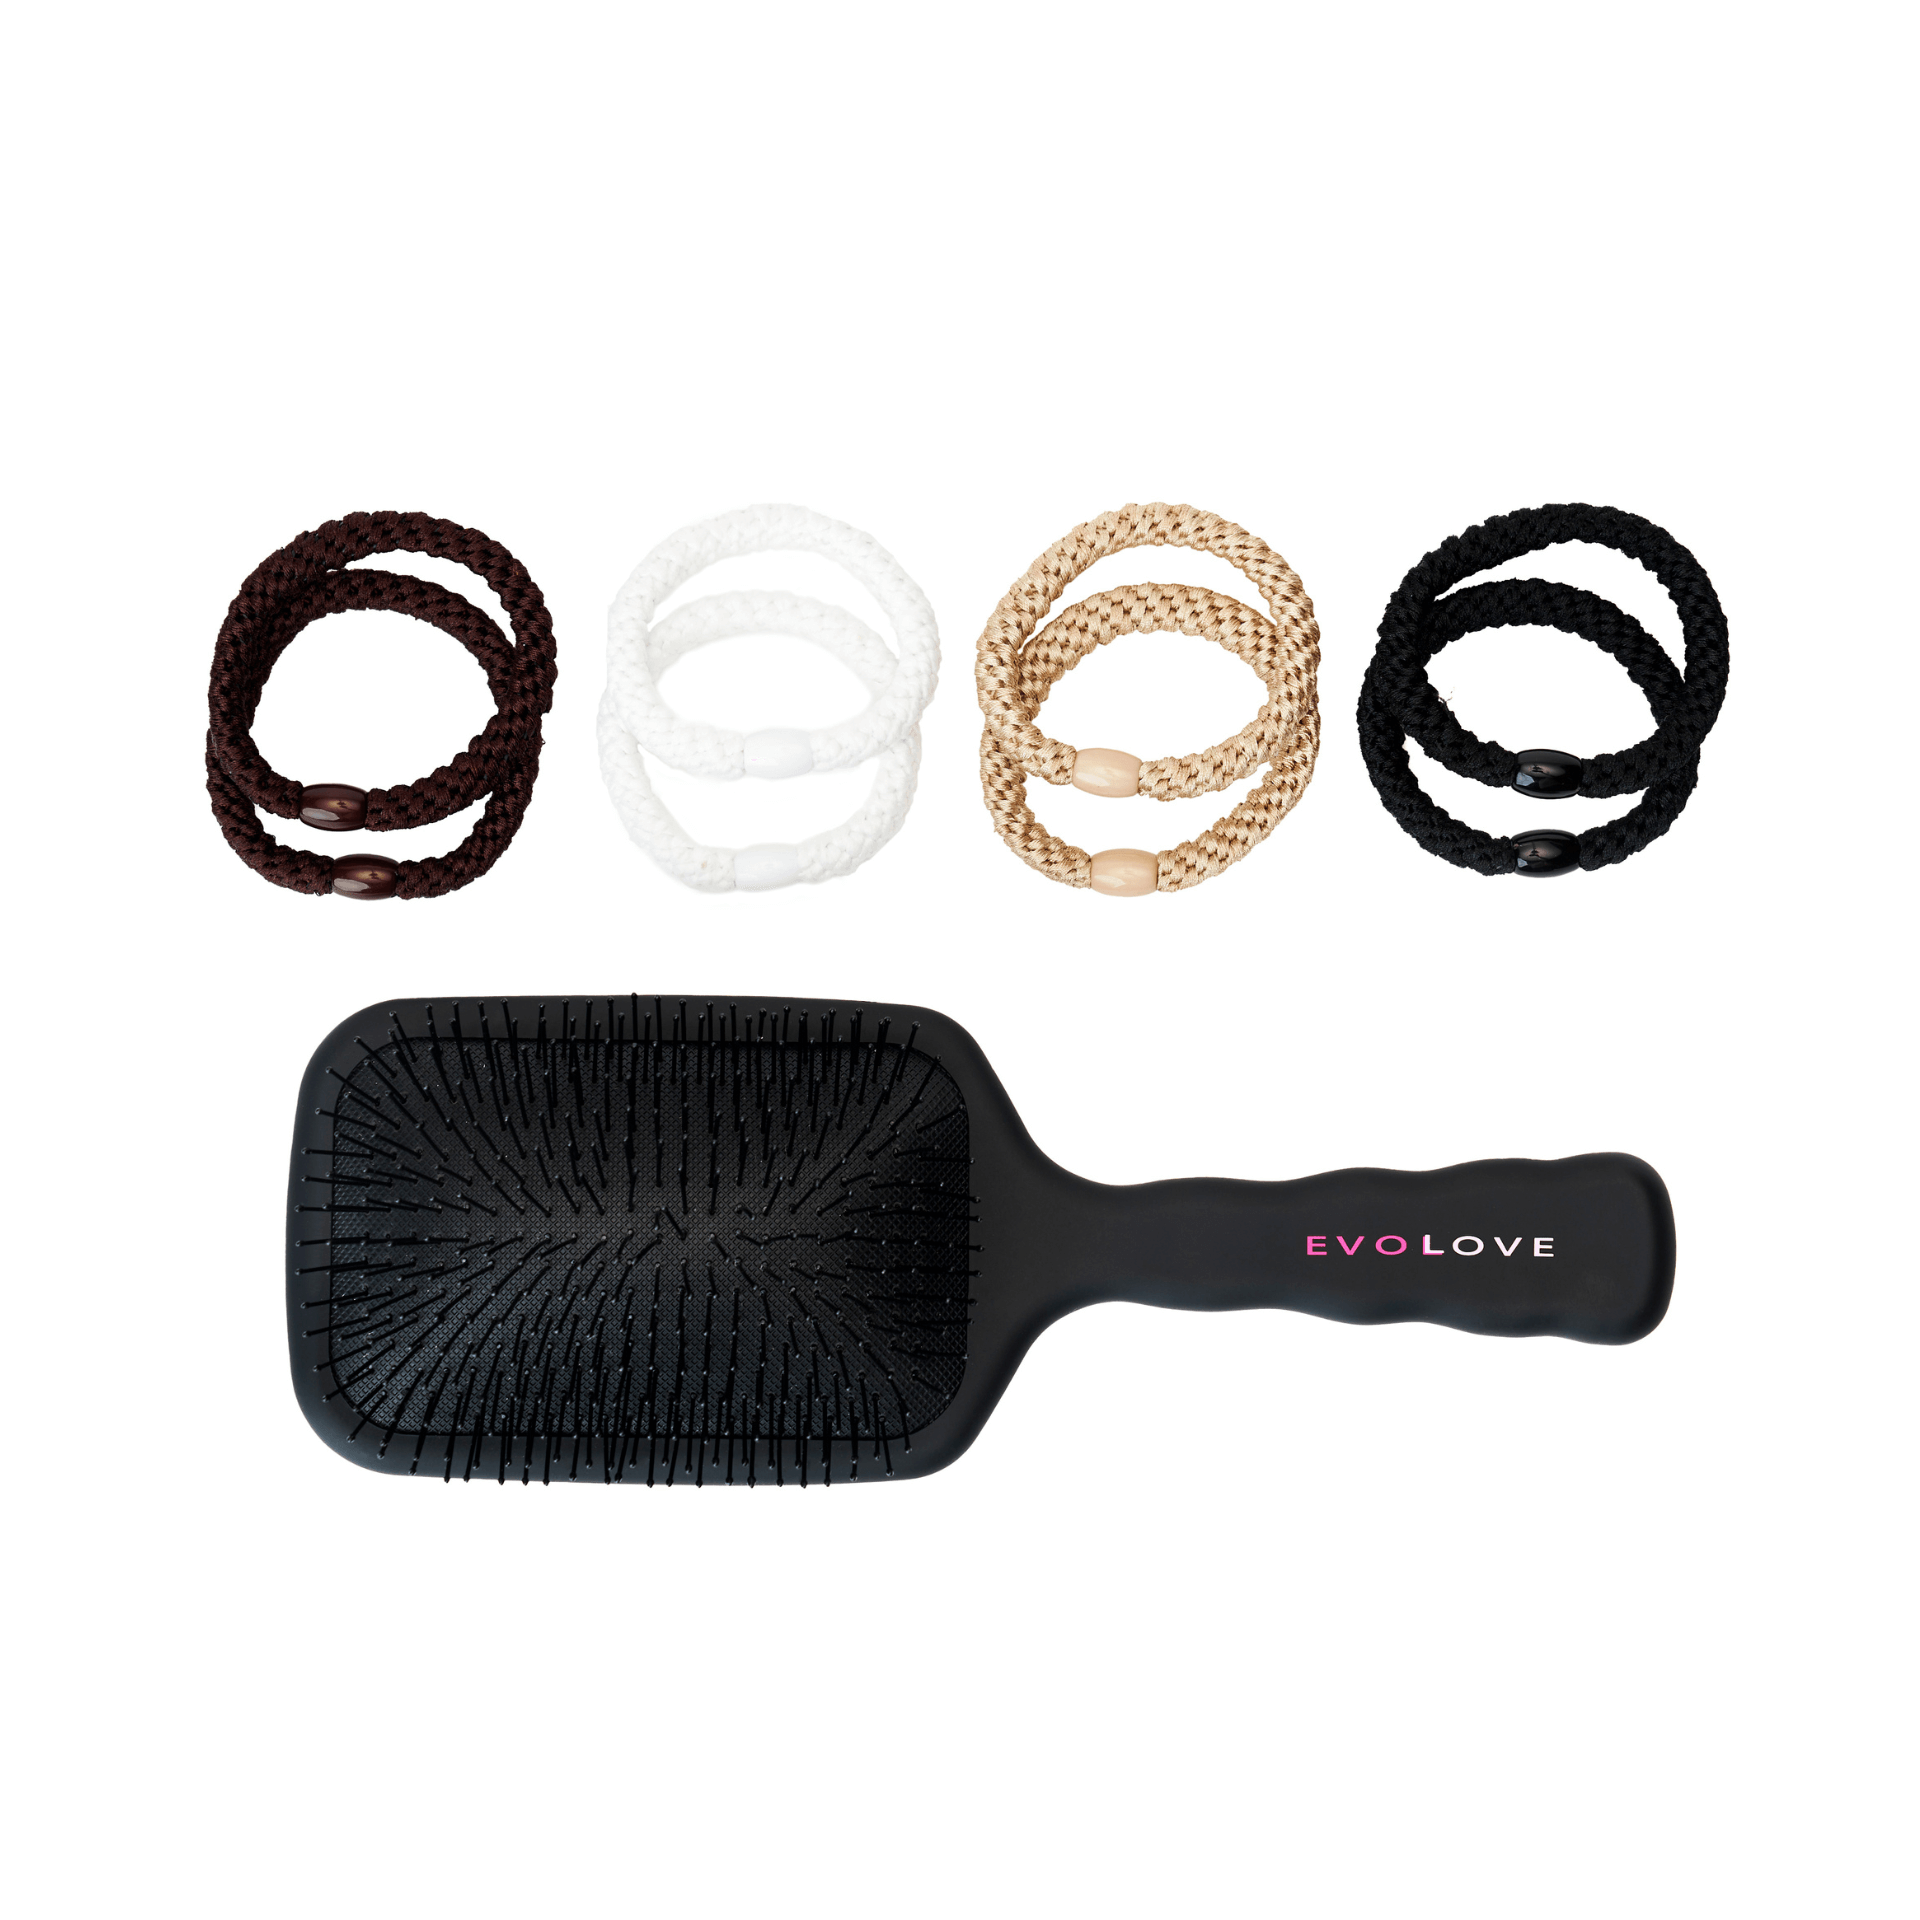 Hair brush and hair tie set displayed clearly against a white background.